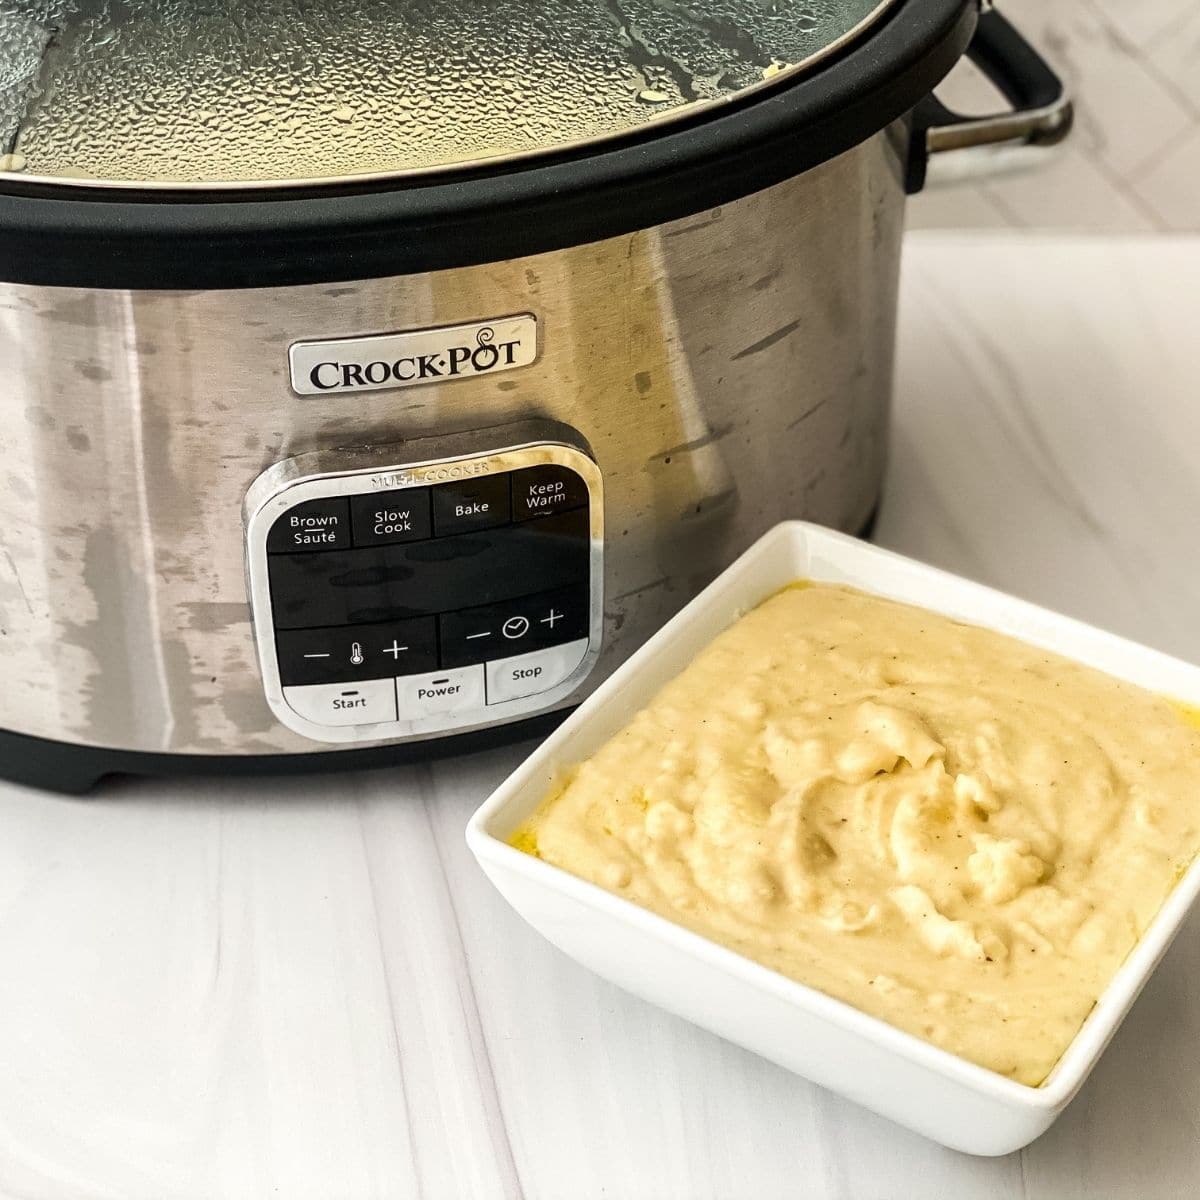 Silver crock Pot on white counter with white square bowl of creamy potatoes in front